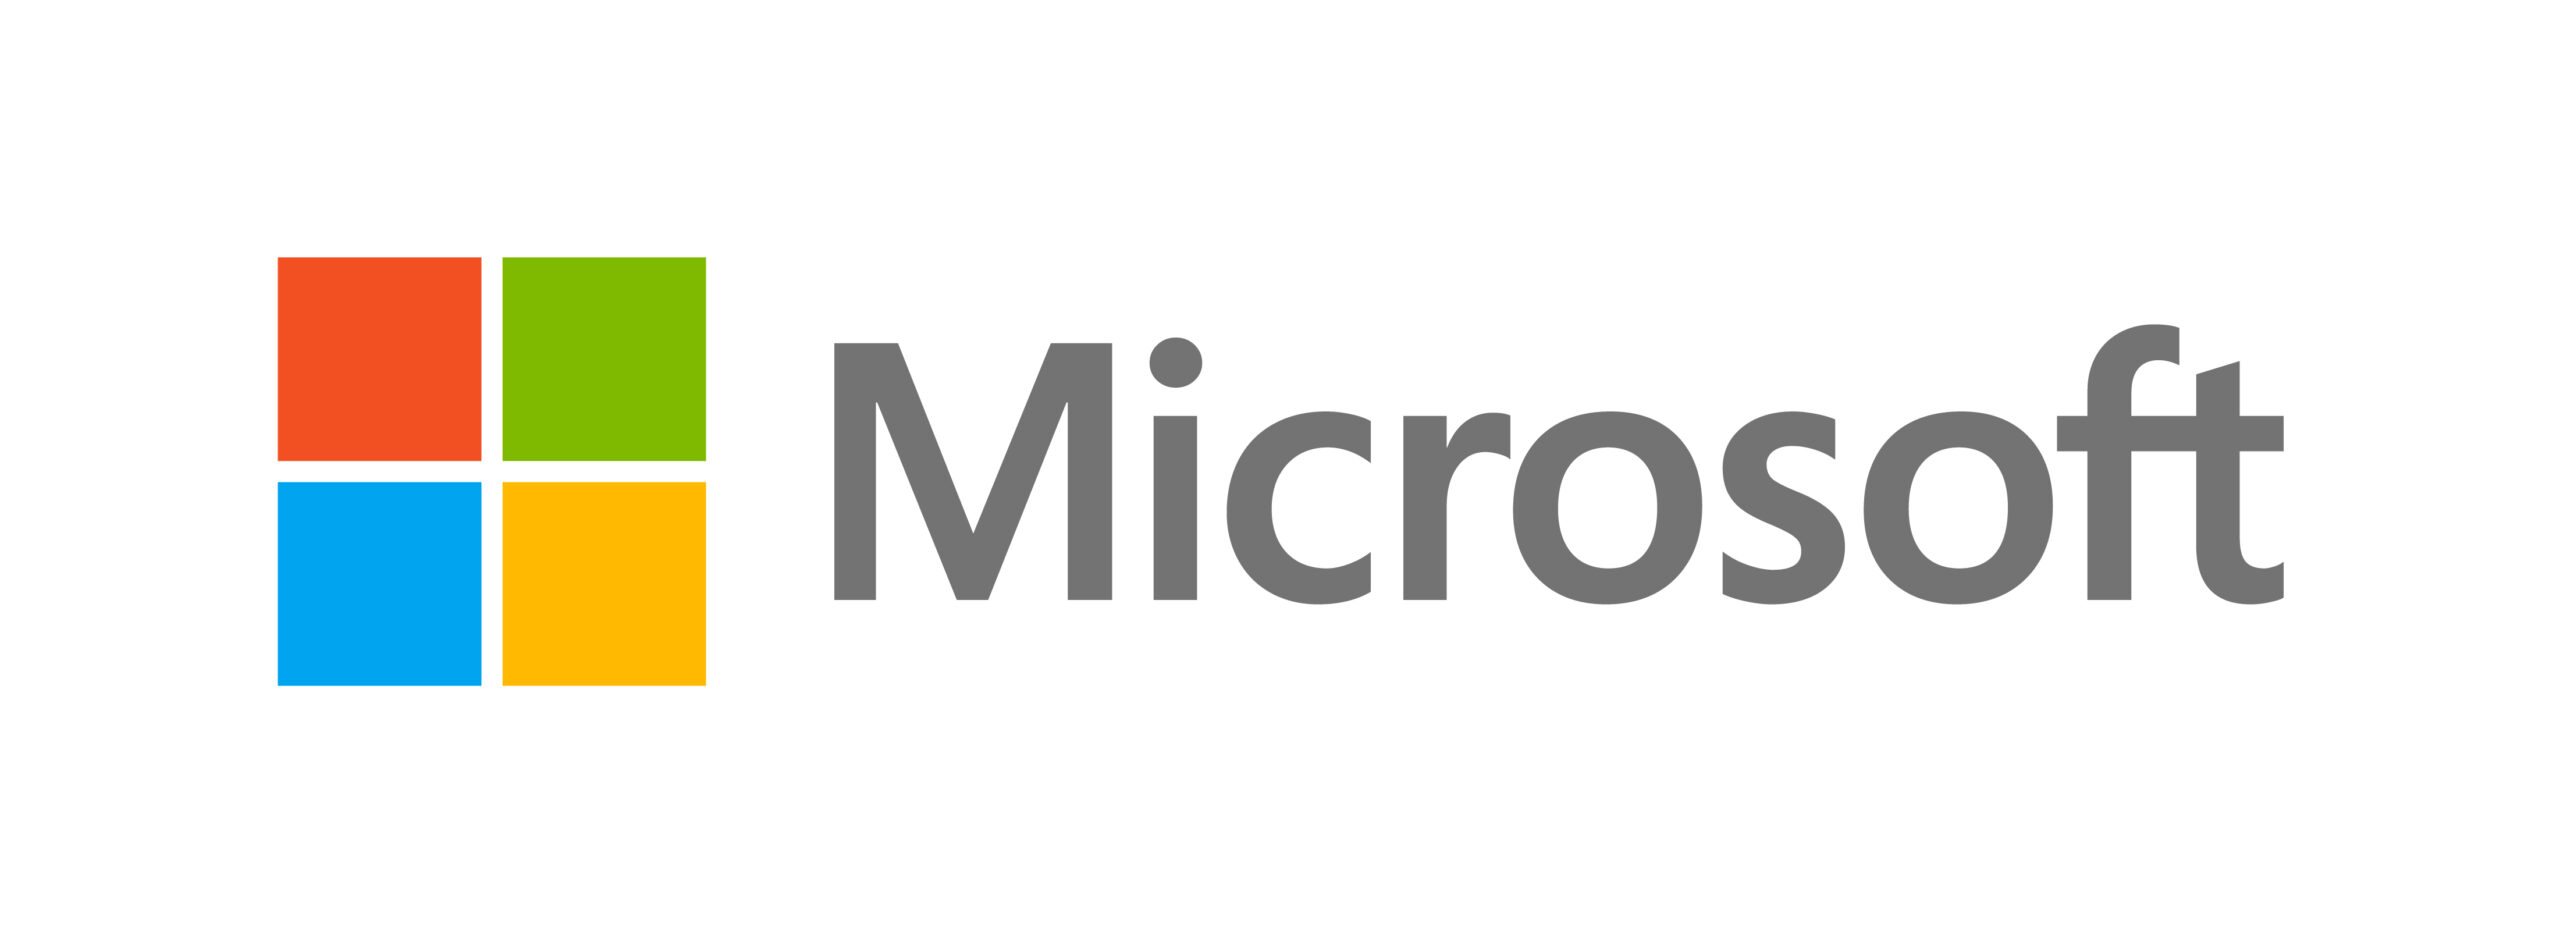 Microsoft Logo - A company that provides certifications for Entry level IT jobs